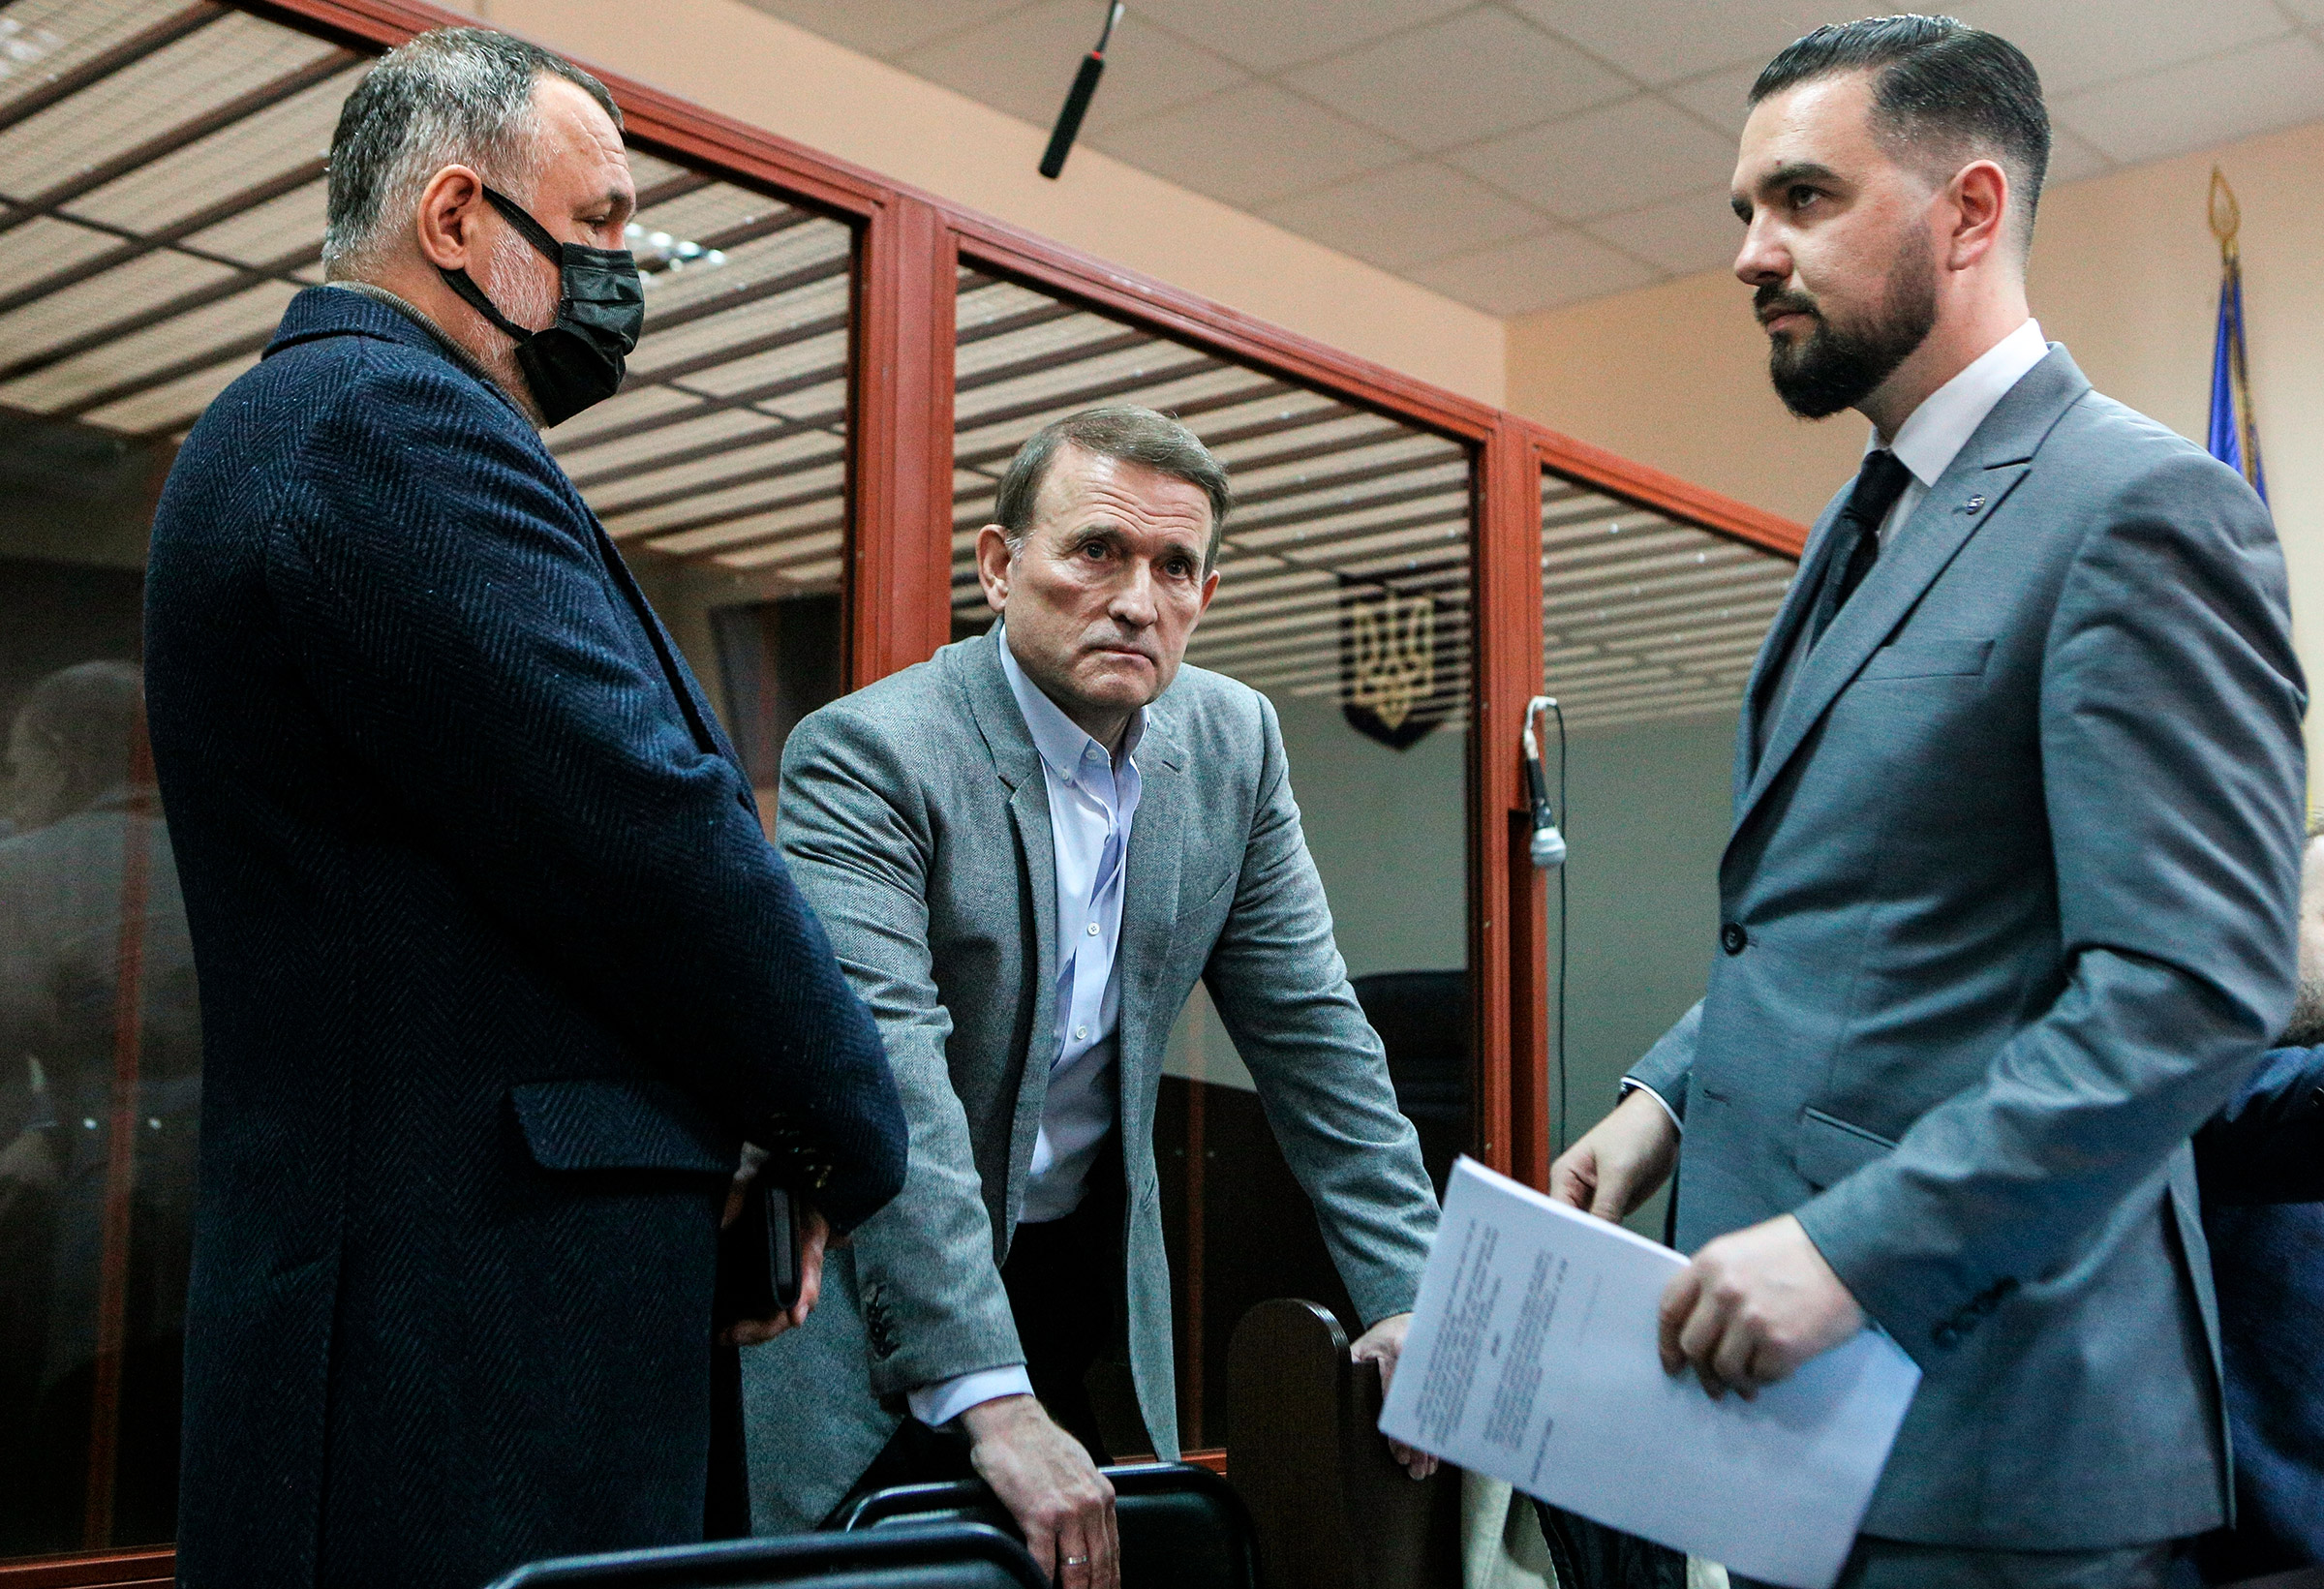 Medvedchuk, center, faces treason charges in Kyiv (Sputnik/AP)